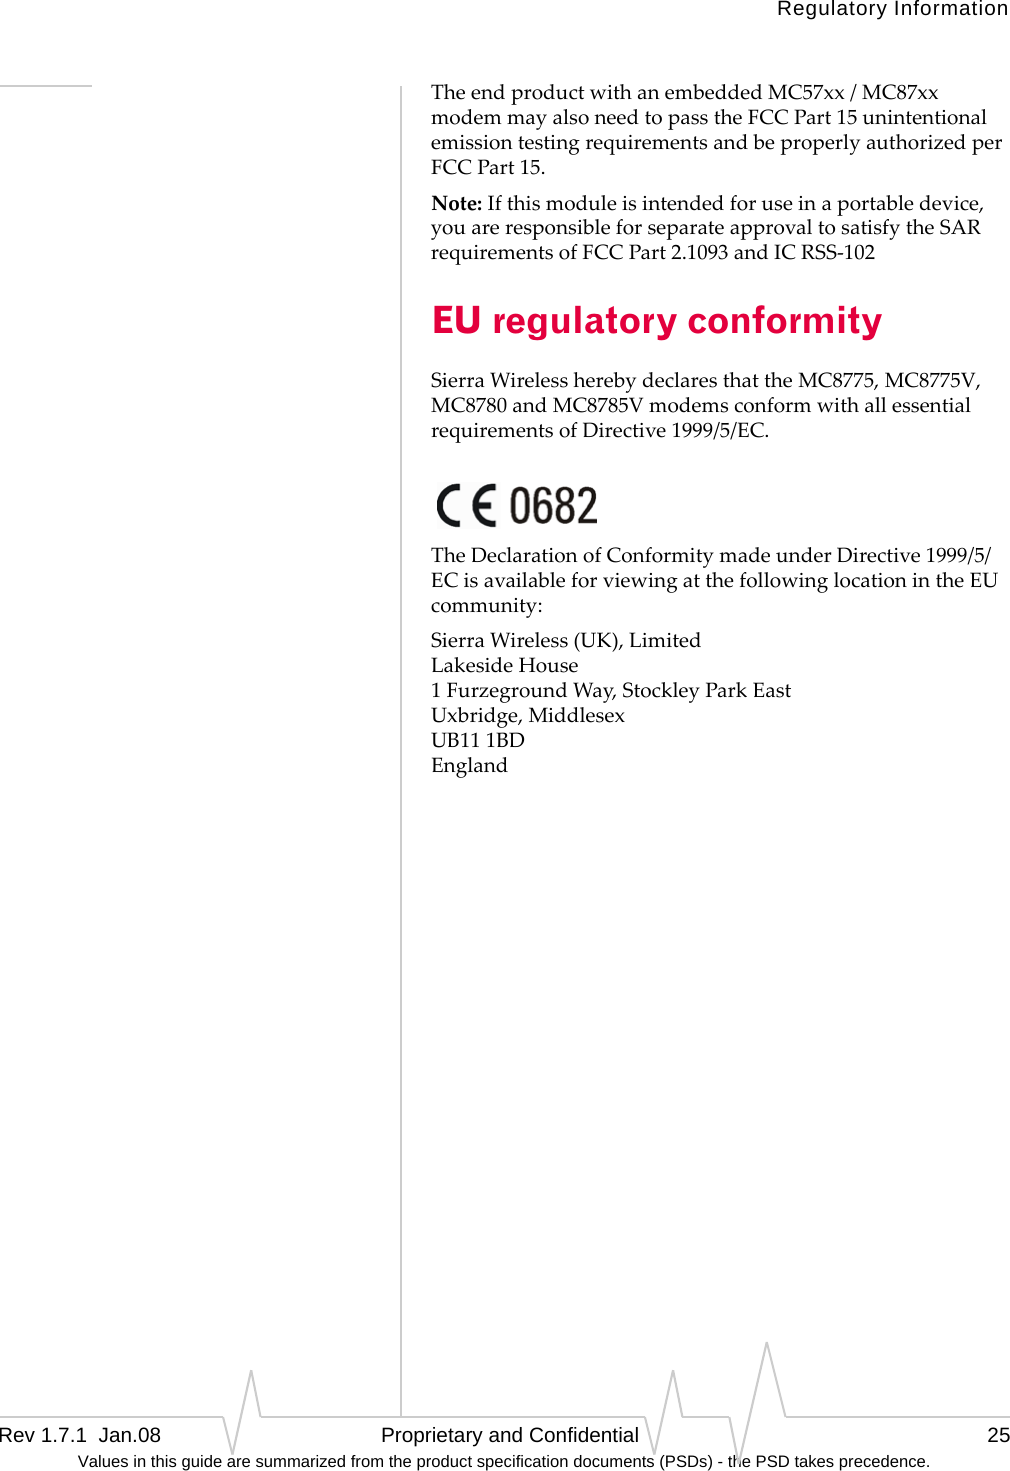 Regulatory InformationRev 1.7.1  Jan.08   Proprietary and Confidential 25Values in this guide are summarized from the product specification documents (PSDs) - the PSD takes precedence.TheendproductwithanembeddedMC57xx/MC87xxmodemmayalsoneedtopasstheFCCPart15unintentionalemissiontestingrequirementsandbeproperlyauthorizedperFCCPart15.Note:Ifthismoduleisintendedforuseinaportabledevice,youareresponsibleforseparateapprovaltosatisfytheSARrequirementsofFCCPart2.1093andICRSS‐102EU regulatory conformitySierraWirelessherebydeclaresthattheMC8775,MC8775V,MC8780andMC8785VmodemsconformwithallessentialrequirementsofDirective1999/5/EC.TheDeclarationofConformitymadeunderDirective1999/5/ECisavailableforviewingatthefollowinglocationintheEUcommunity:SierraWireless(UK),Limited LakesideHouse 1FurzegroundWay,StockleyParkEast Uxbridge,Middlesex UB111BD England